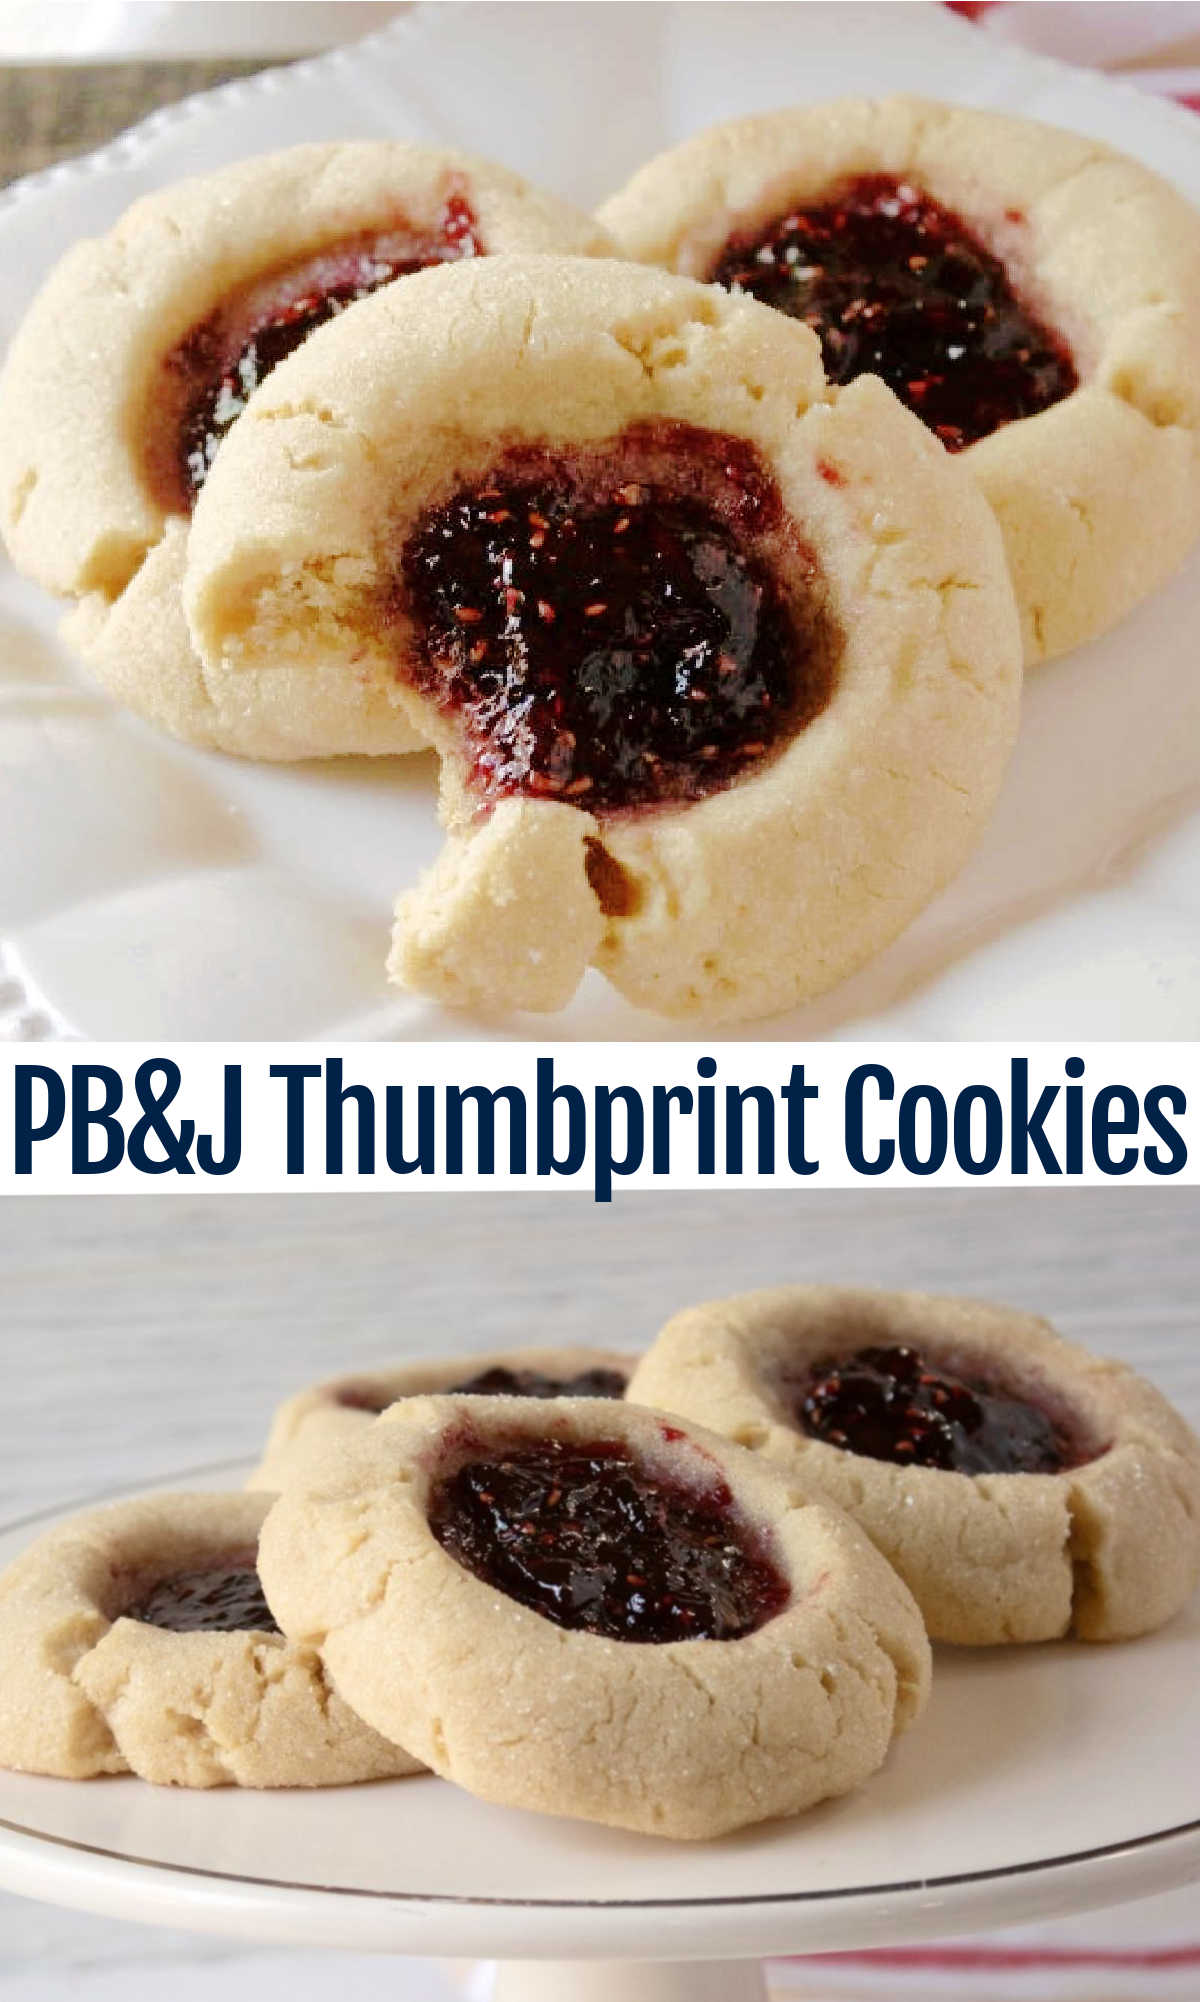 Take the classic combination of peanut butter and jelly and turn it into scrumptious thumbprint cookies. They are a fun back to school treat, perfect for holiday cookie trays or just because!